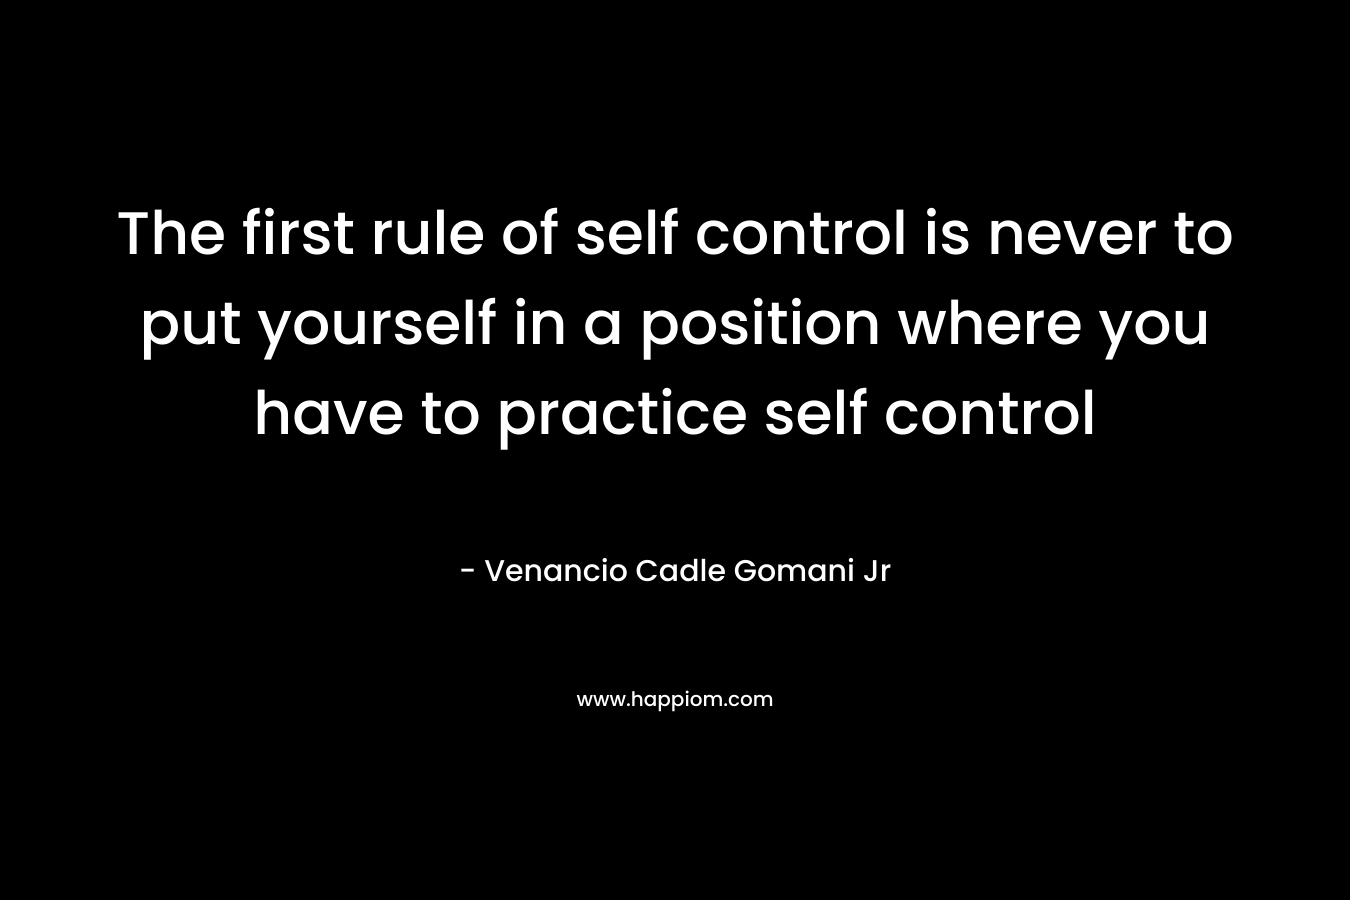 The first rule of self control is never to put yourself in a position where you have to practice self control